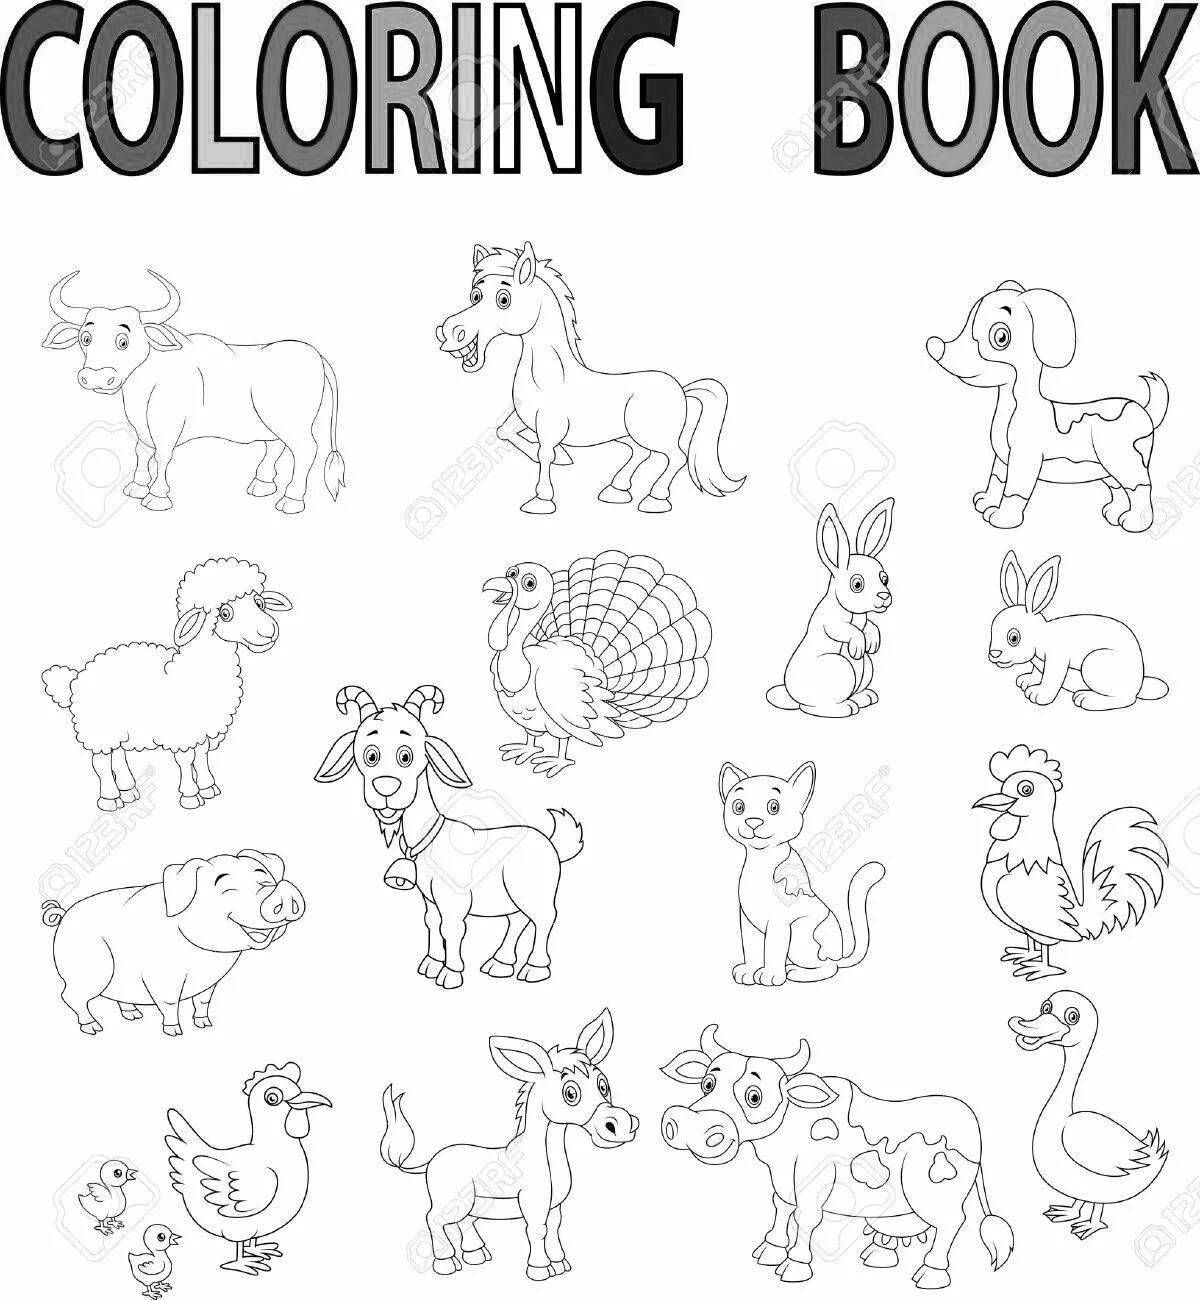 Adorable English animal coloring book for students